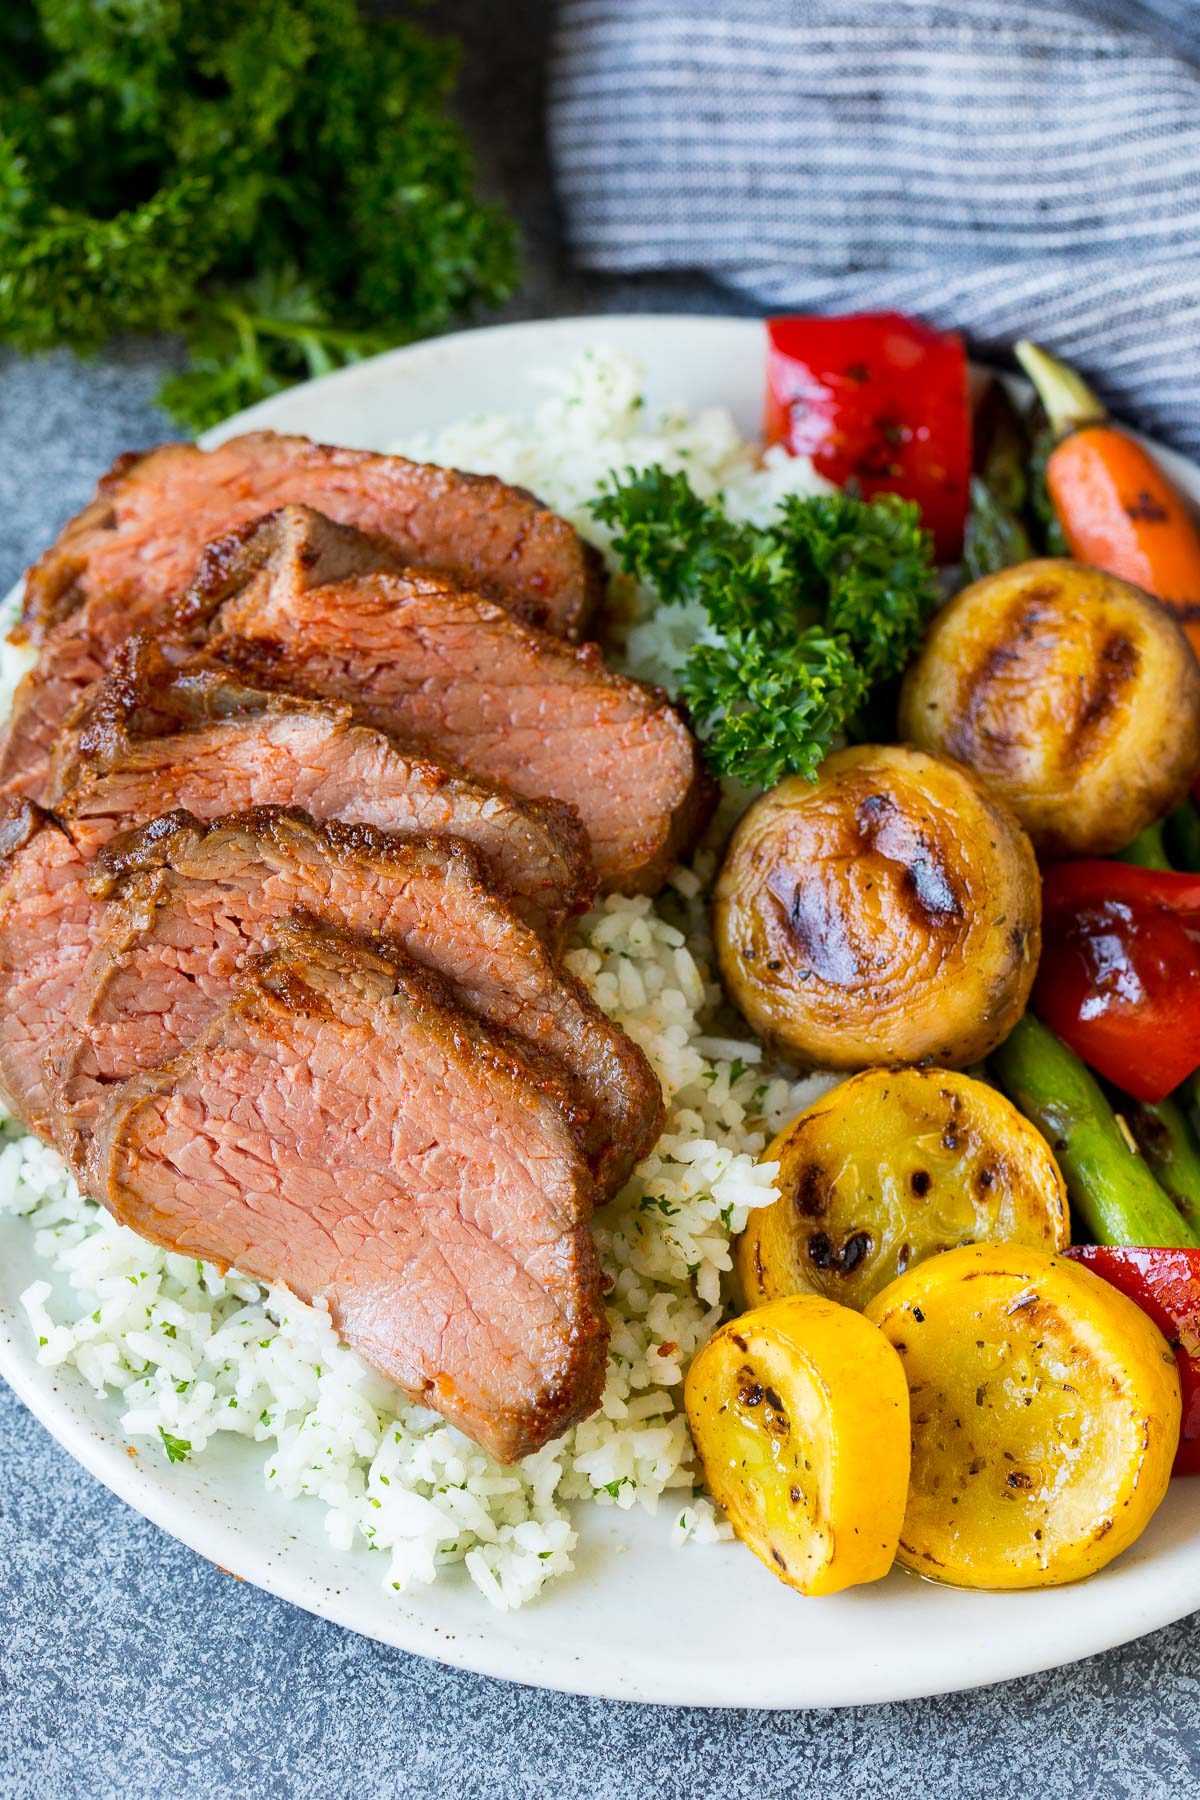 A plate of sliced smoked tri tip with rice and vegetables.